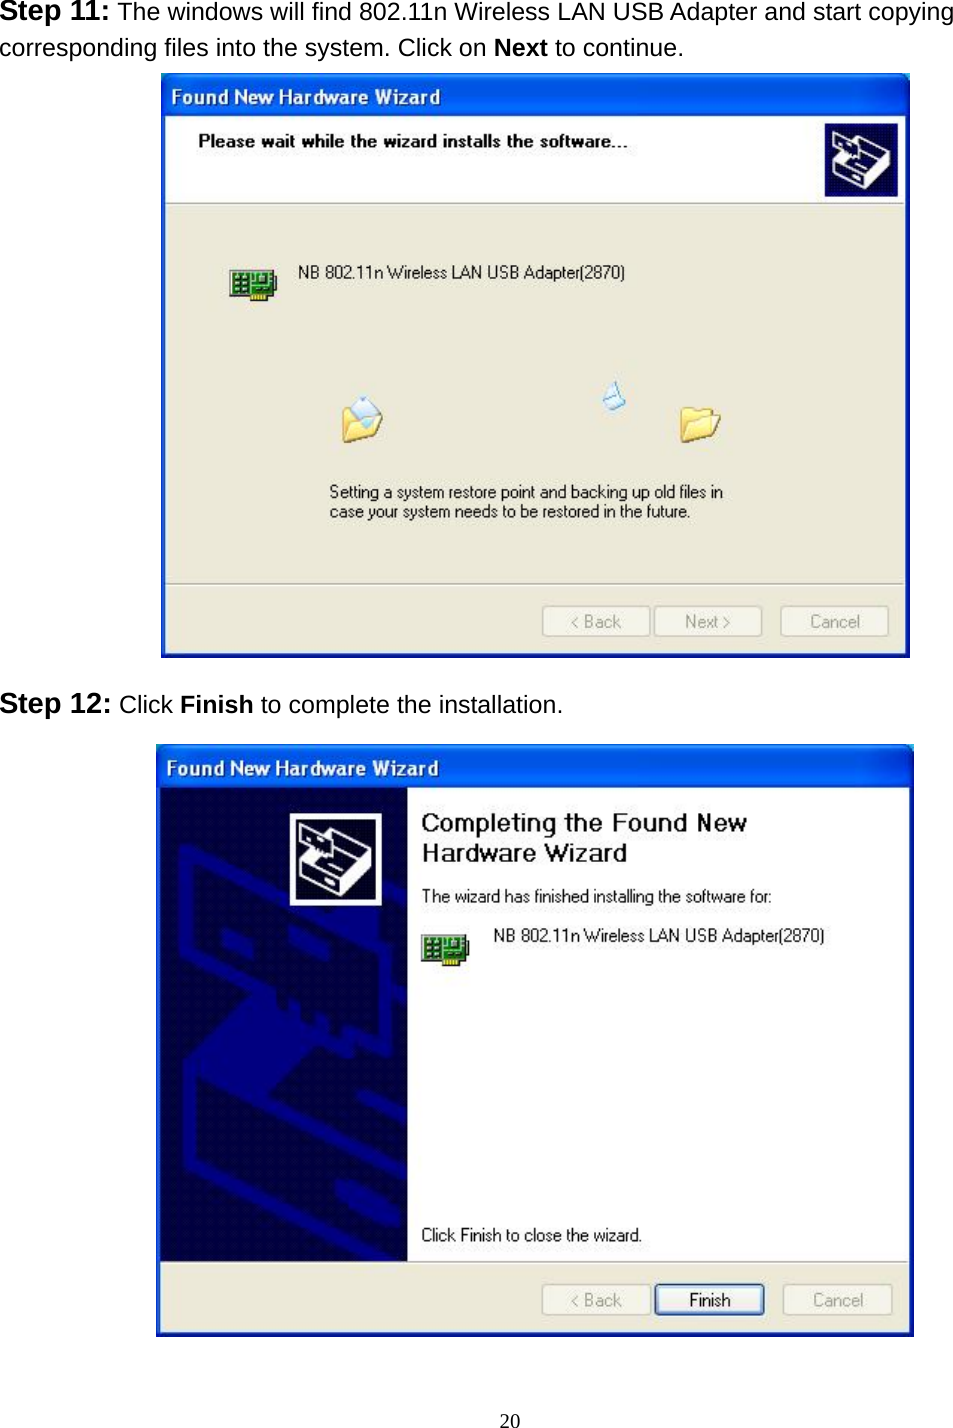  20 Step 11: The windows will find 802.11n Wireless LAN USB Adapter and start copying corresponding files into the system. Click on Next to continue.   Step 12: Click Finish to complete the installation.  